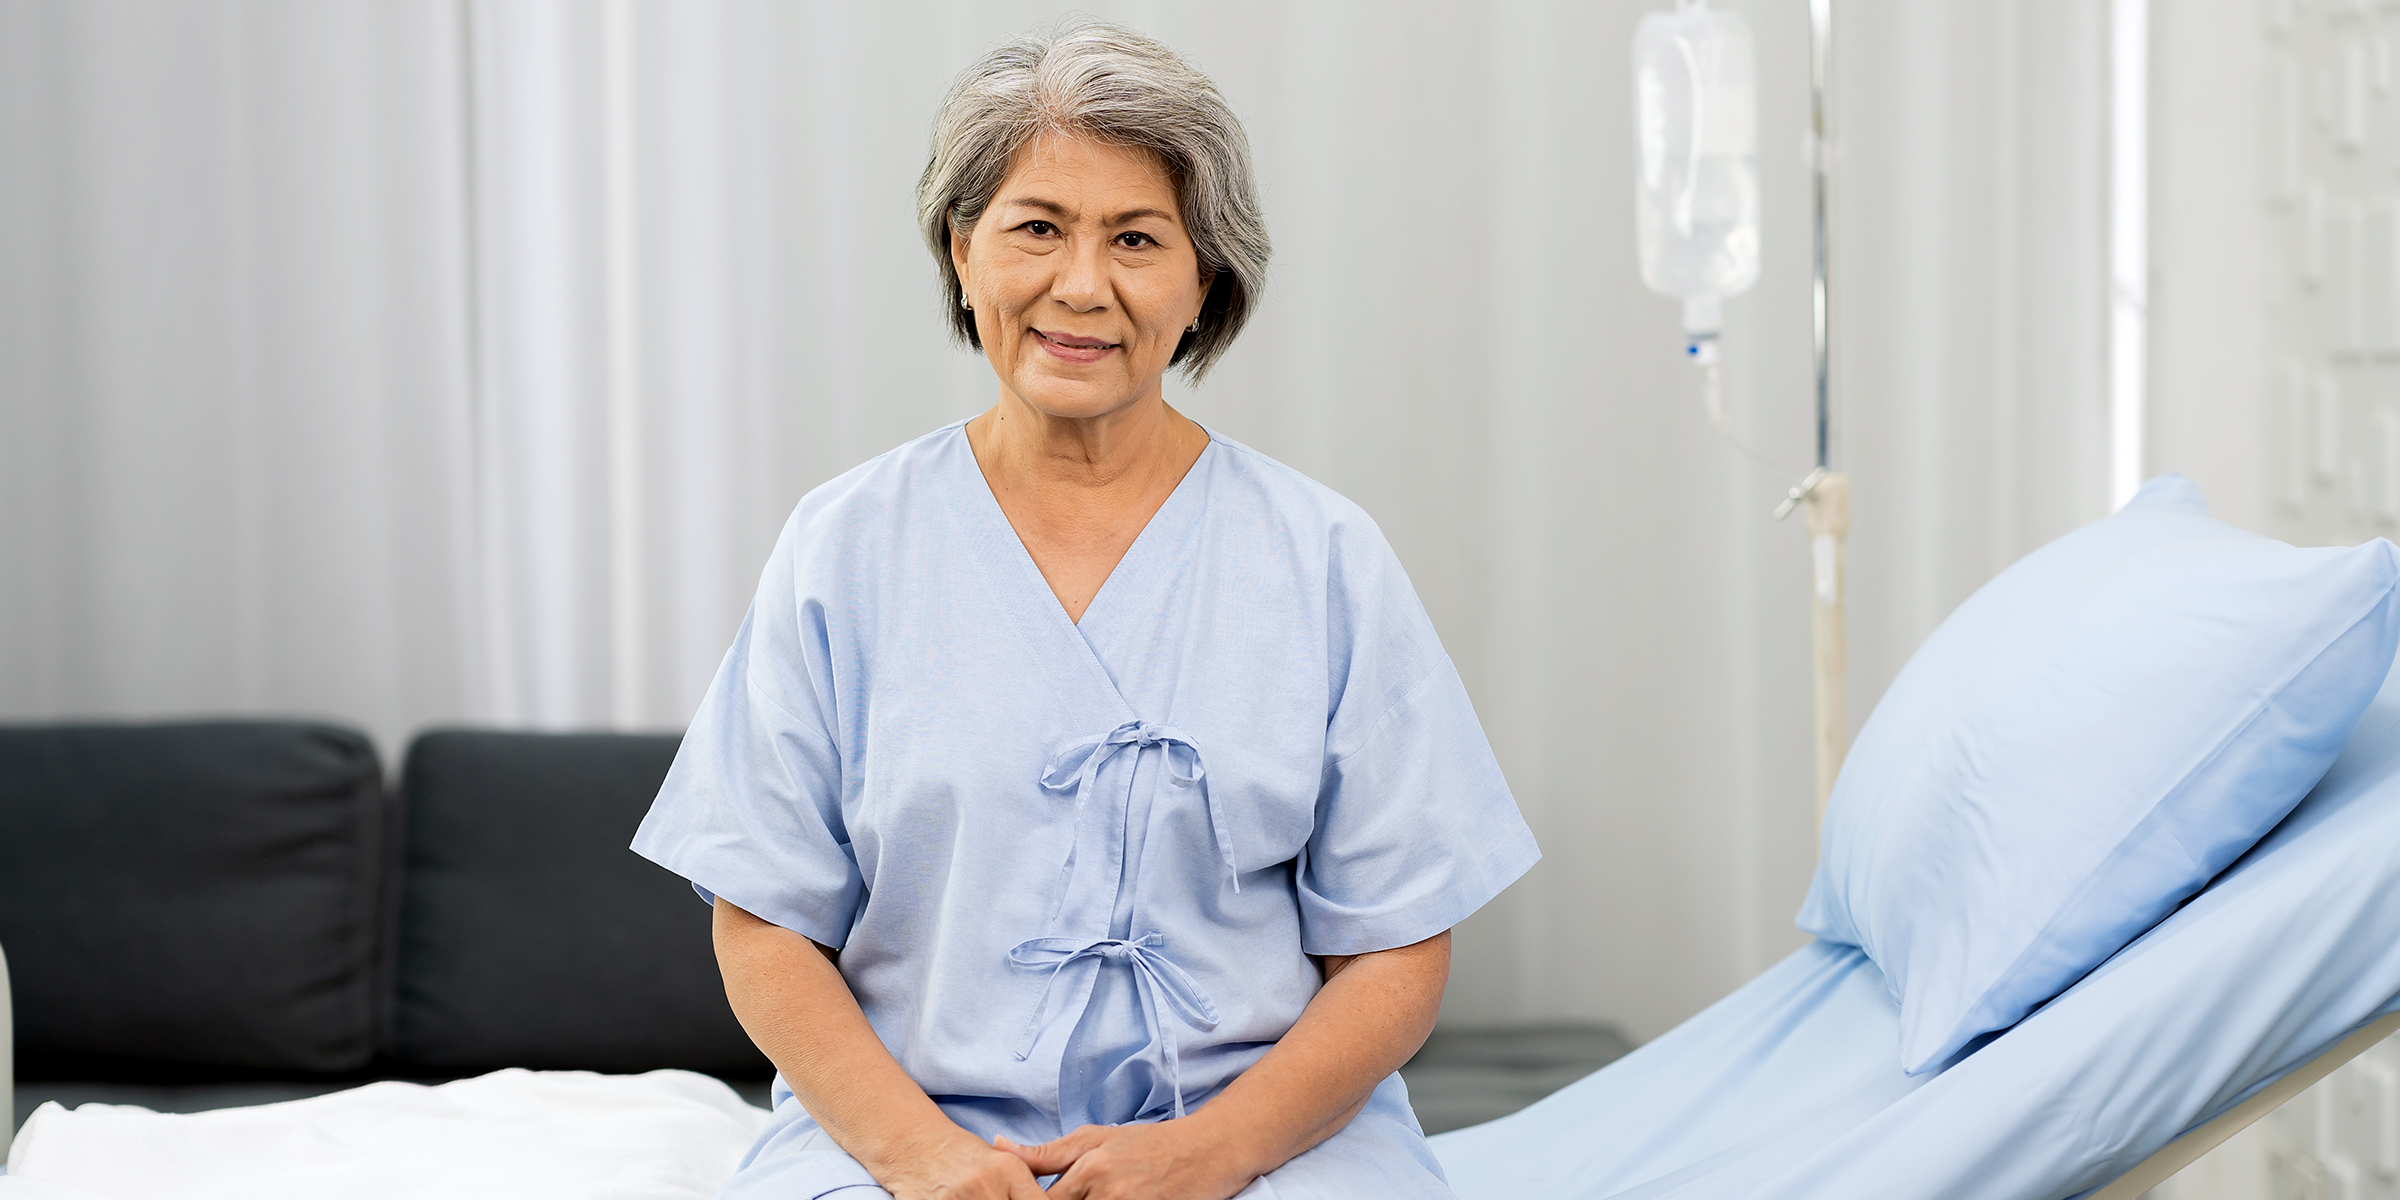 A old woman sitting on a hospital bed | Source: Shutterstock